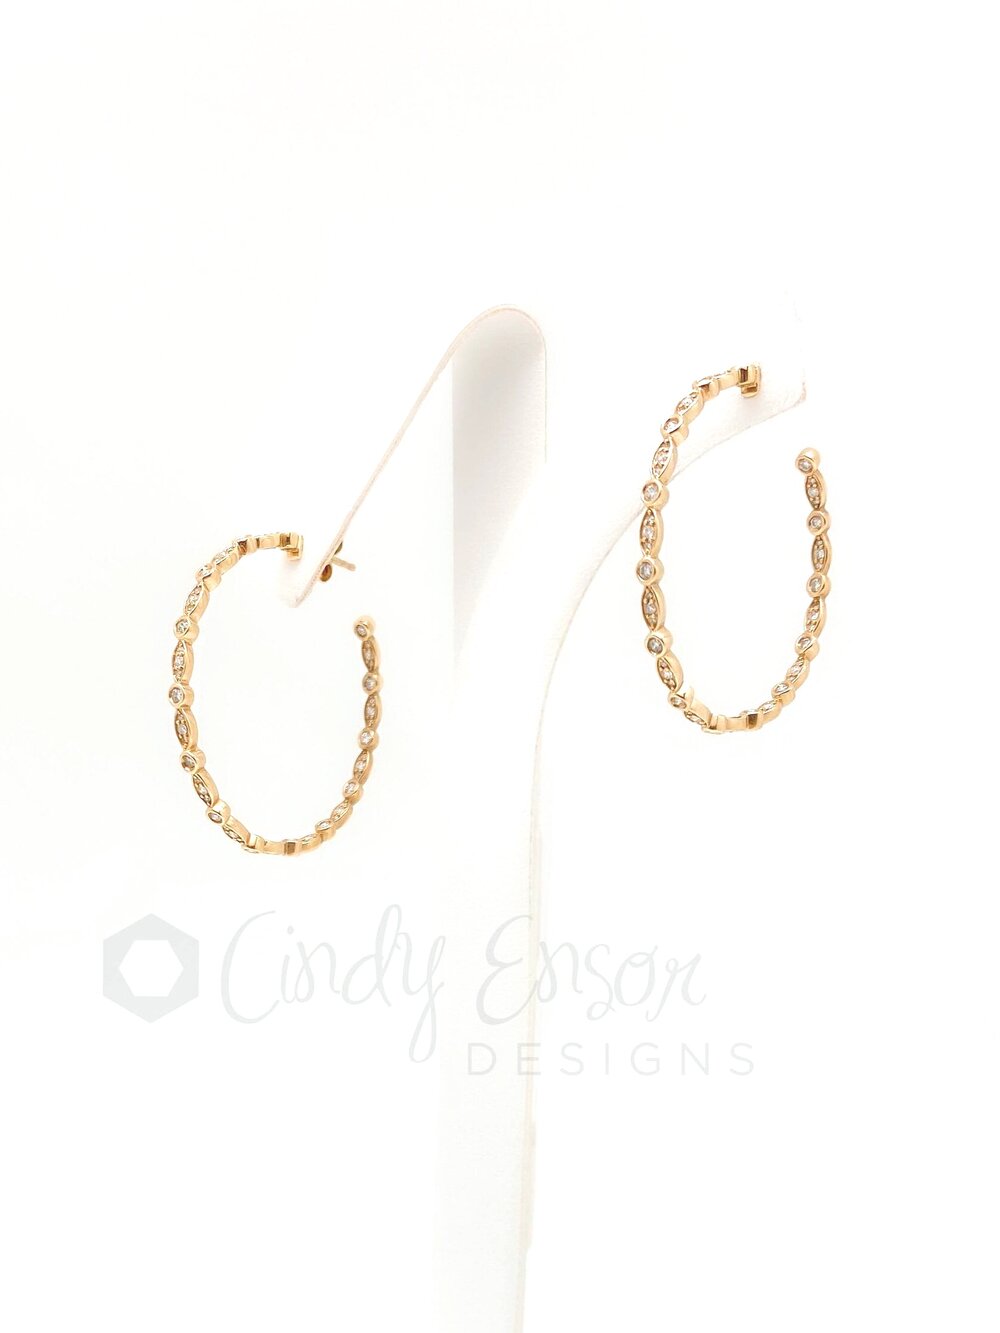 Yellow Gold Chain Drop Earring with Bezeled Diamond — Cindy Ensor Designs